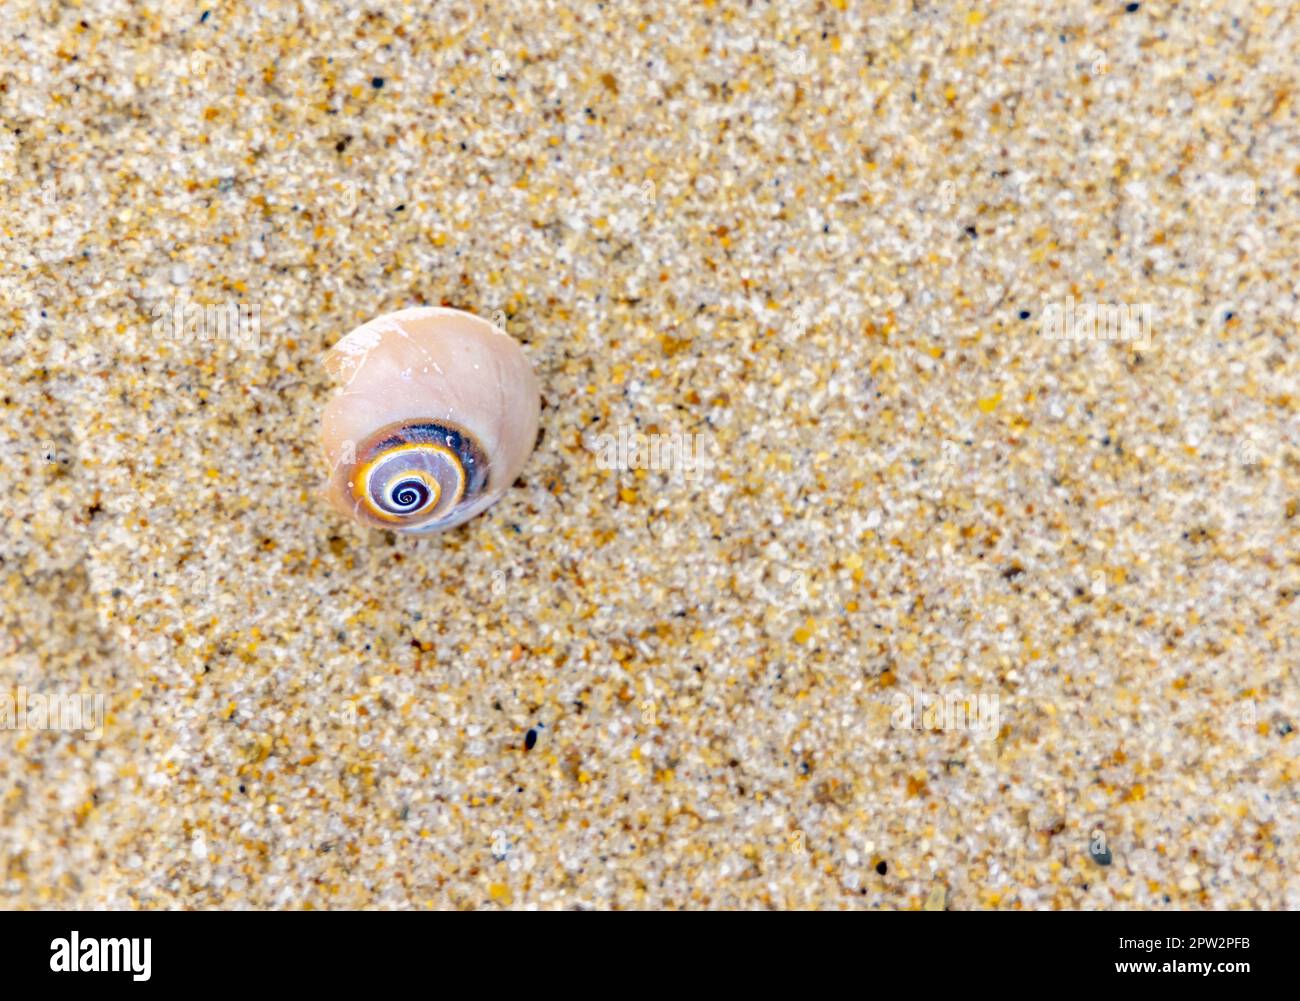 a detail image of a single shell resting in the sand on an ocean beach Stock Photo